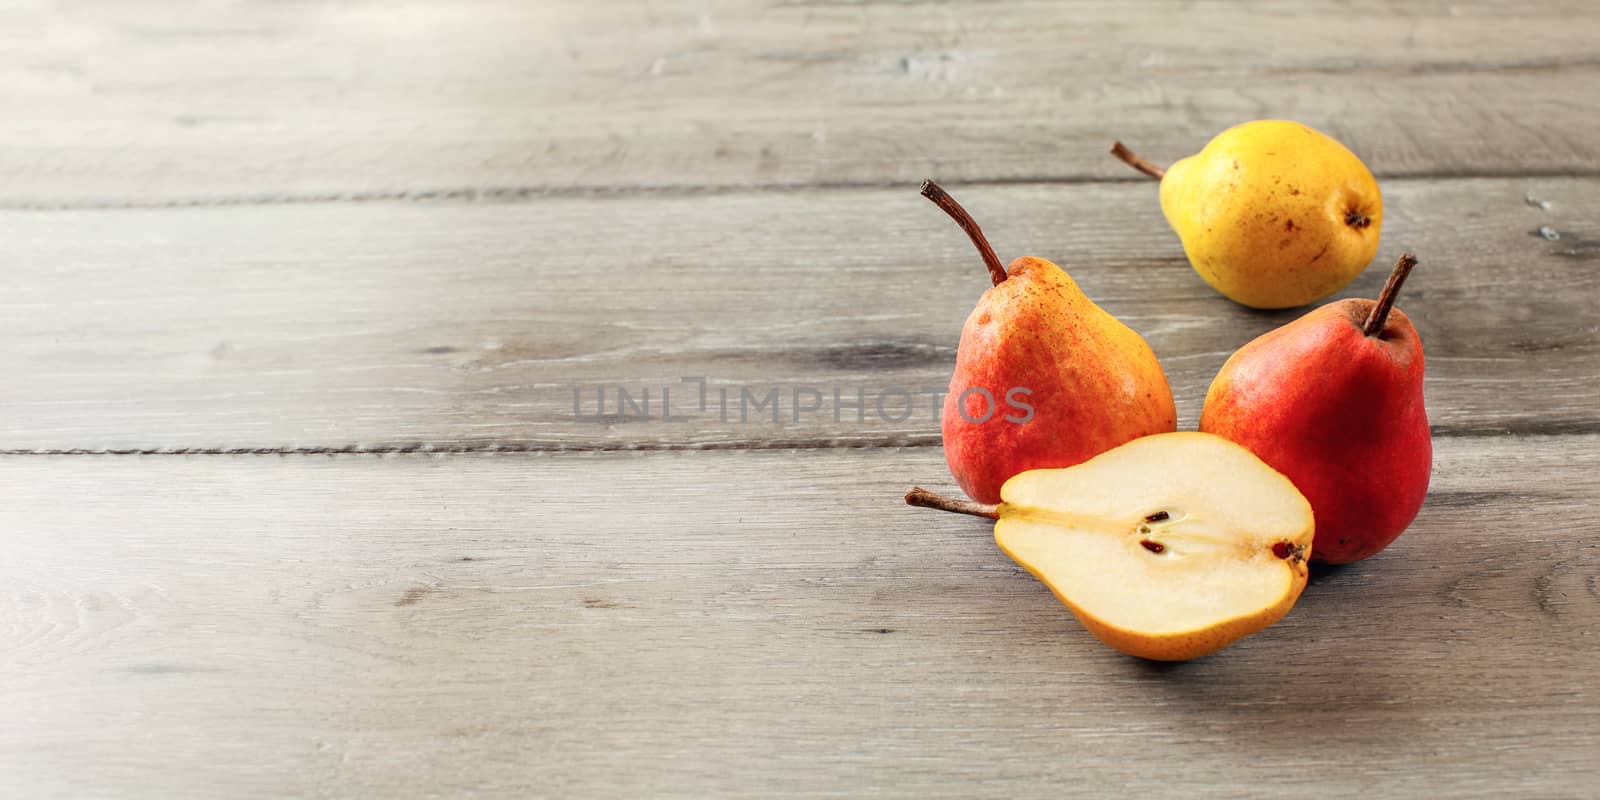 Top view of ripe pears, one of them cut in half, on gray wooden  by Ivanko